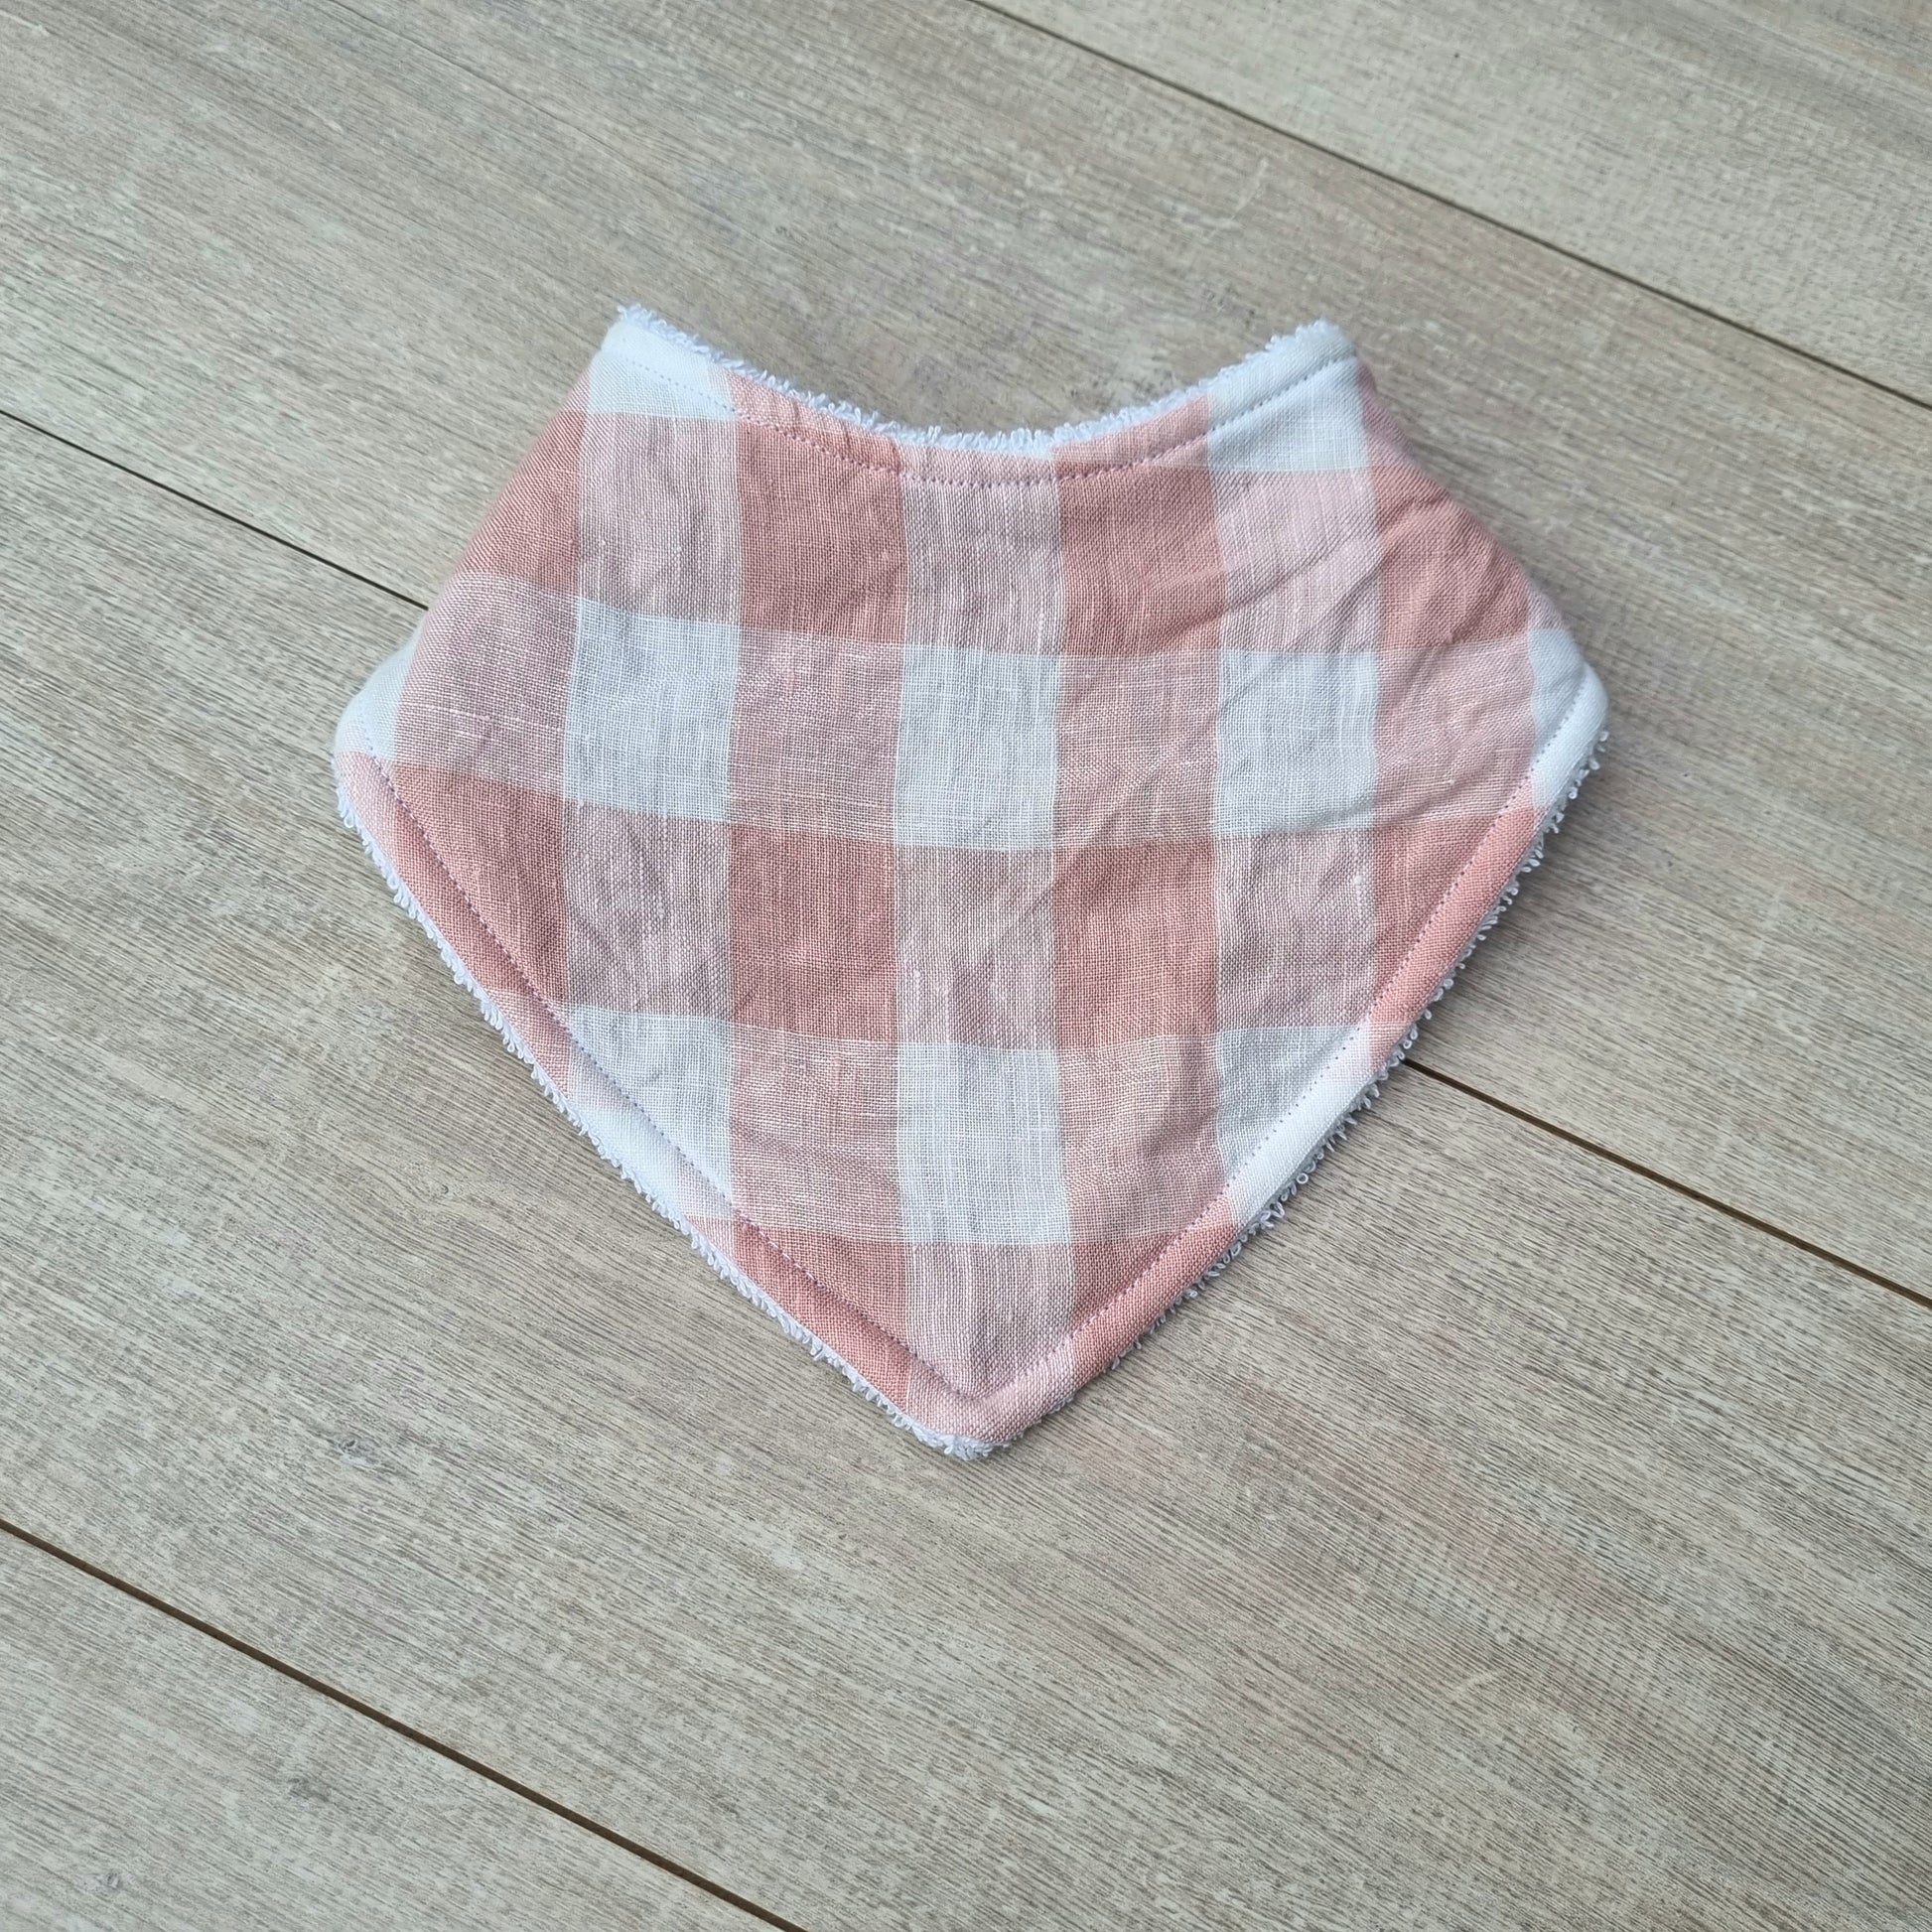 Dribble Bib - Pink Gingham Linen against wooden backdrop. Soft pastel pink checkered pattern on white background